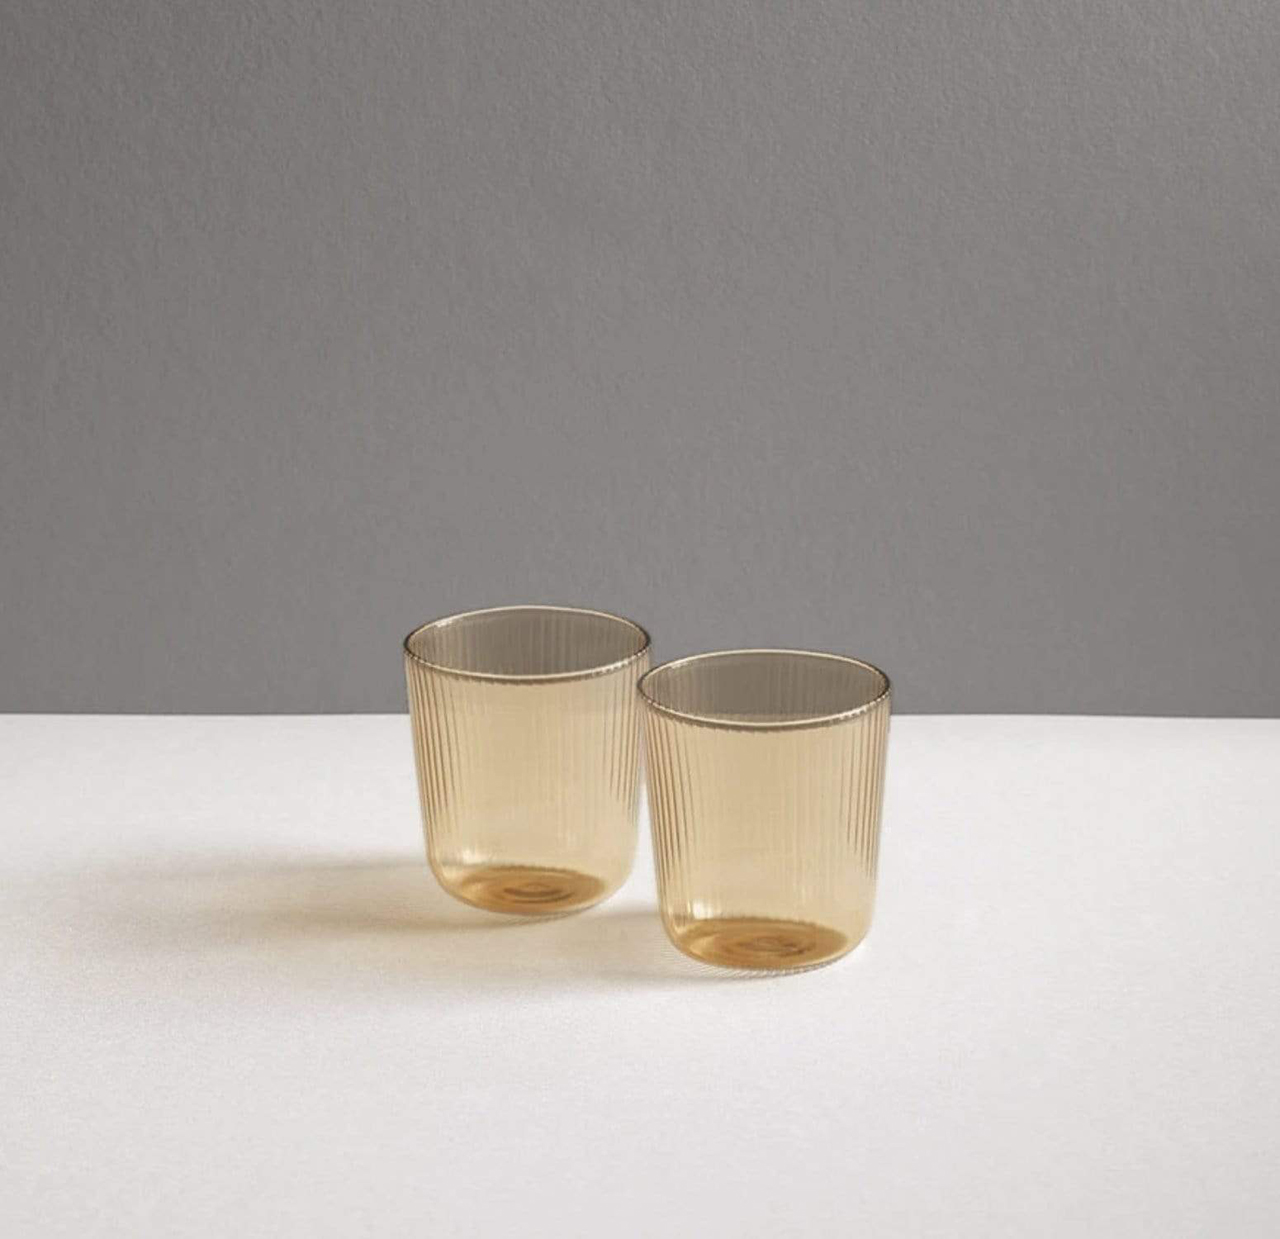 Timeless Italian Glassware by Obakki Is Ready to Go the Distance